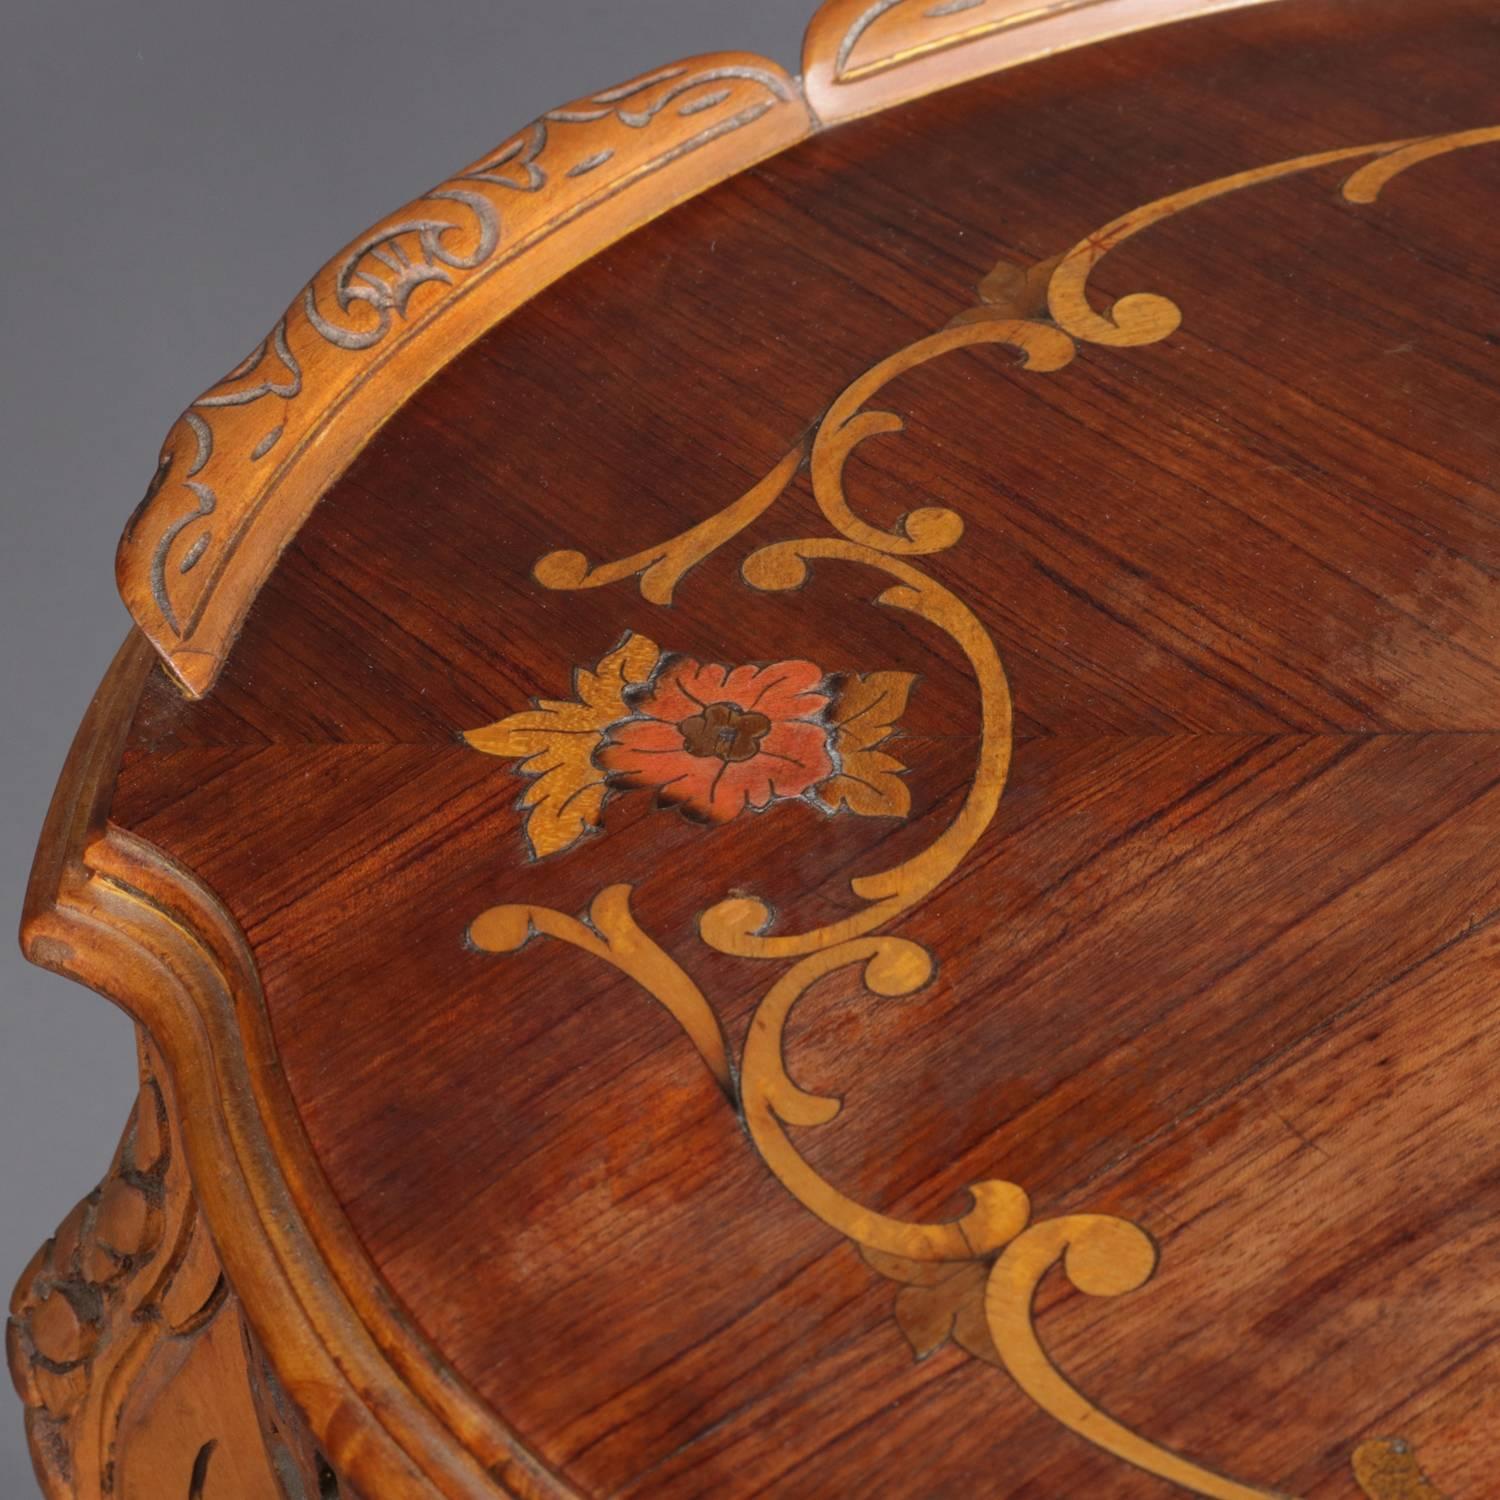 20th Century French Carved Yew Wood and Mahogany Floral Marquetry Inlaid Tea Table